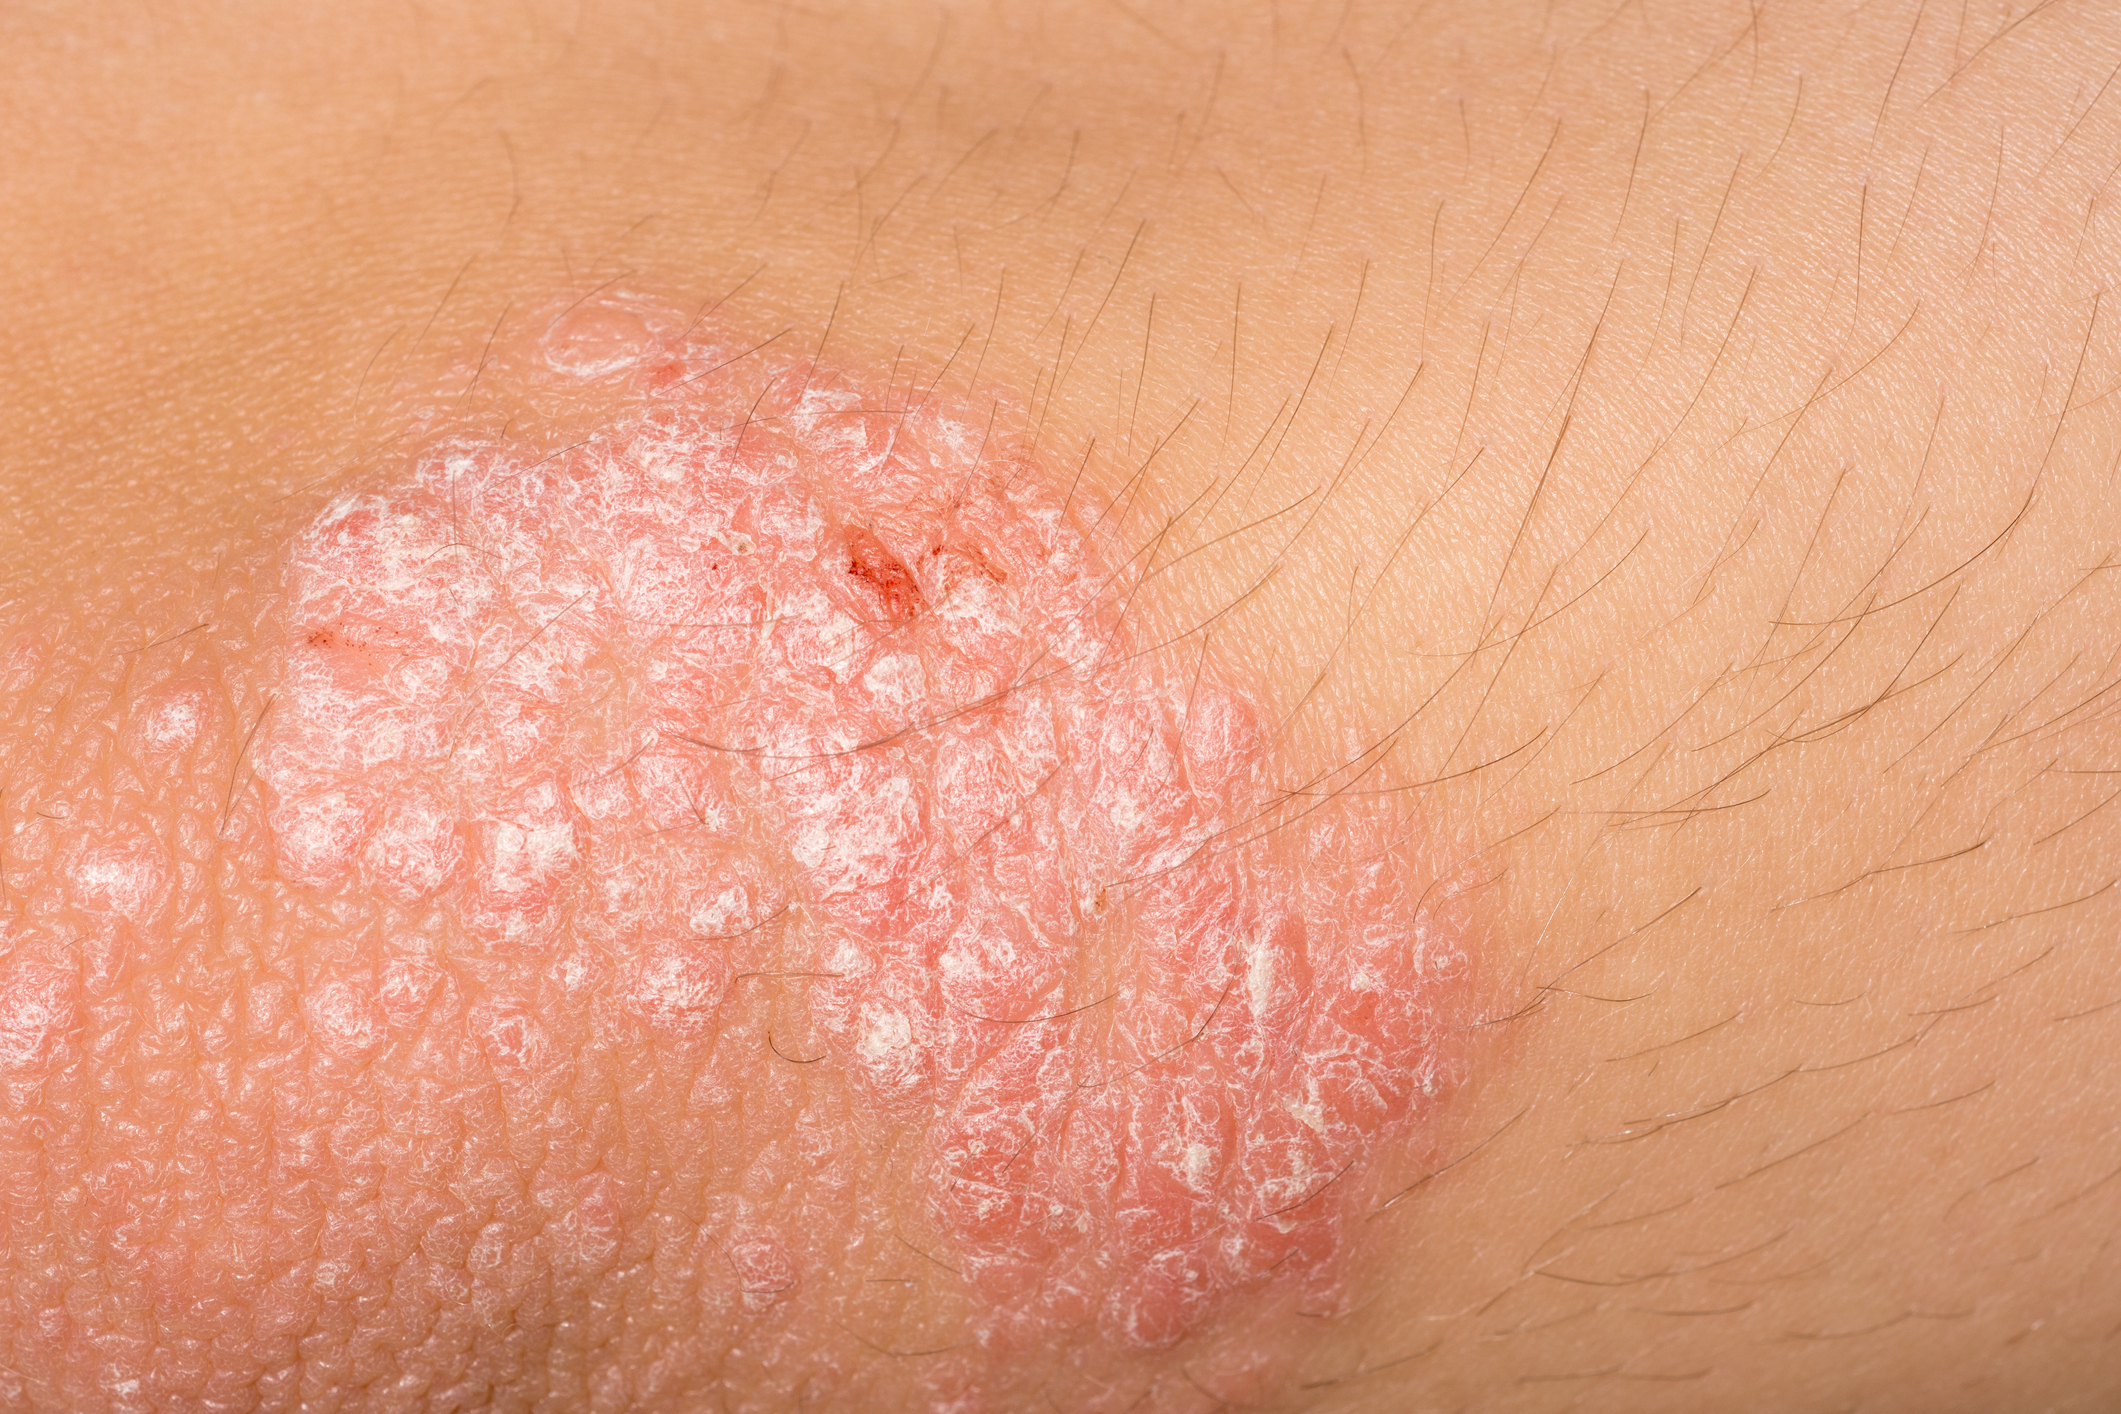 psoriasis scales)